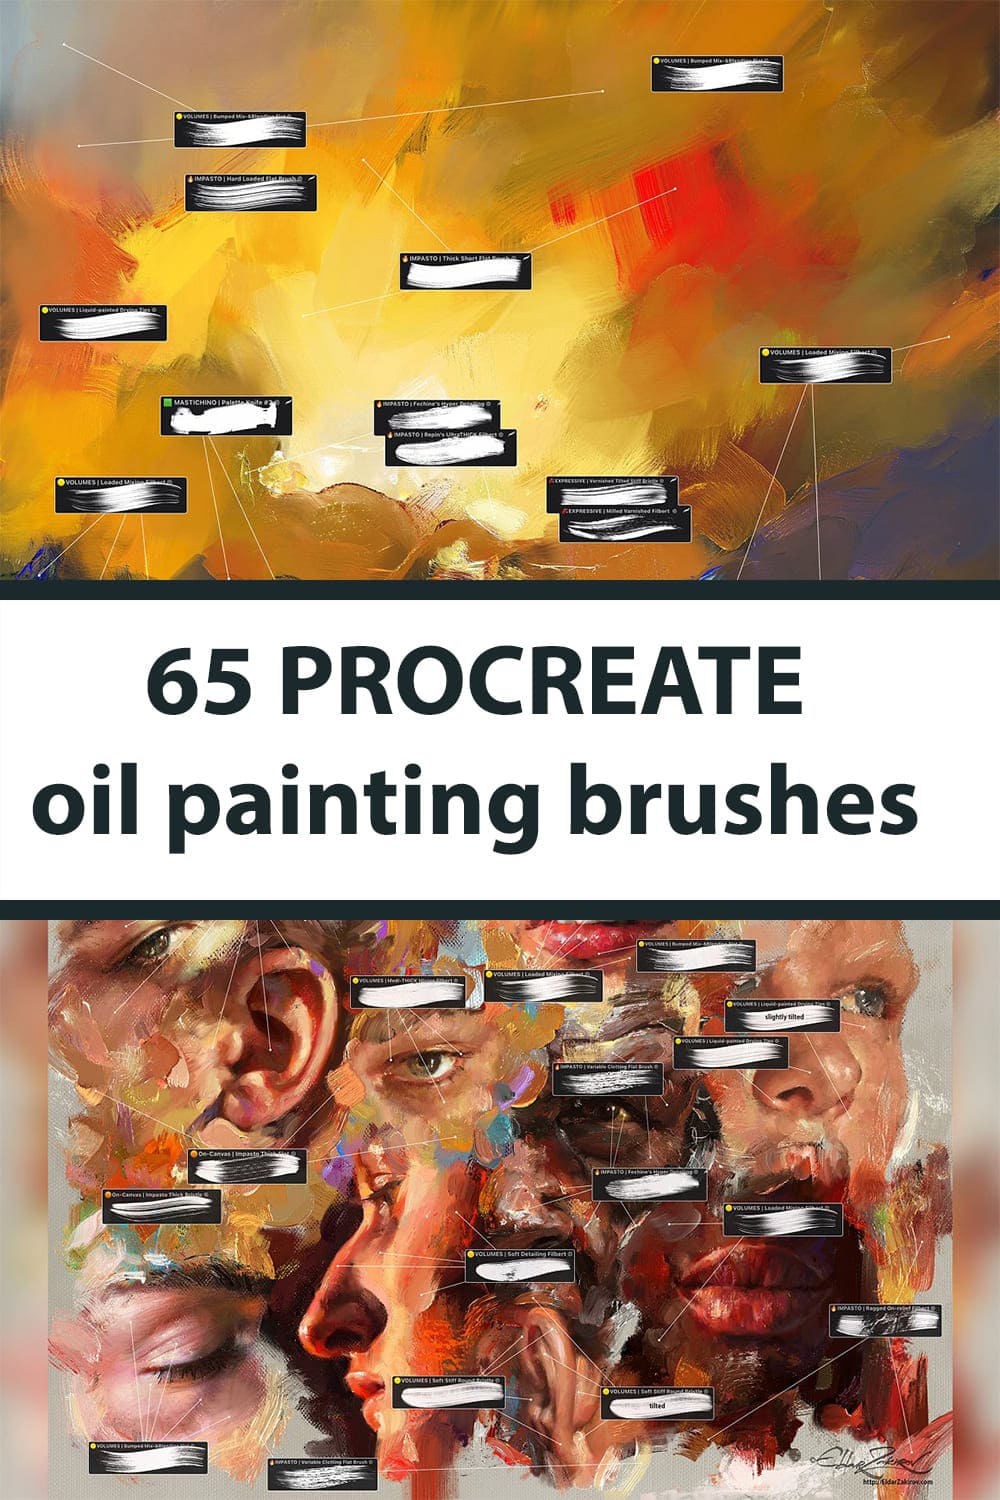 65 Procreate Oil Painting Brushes Preview.